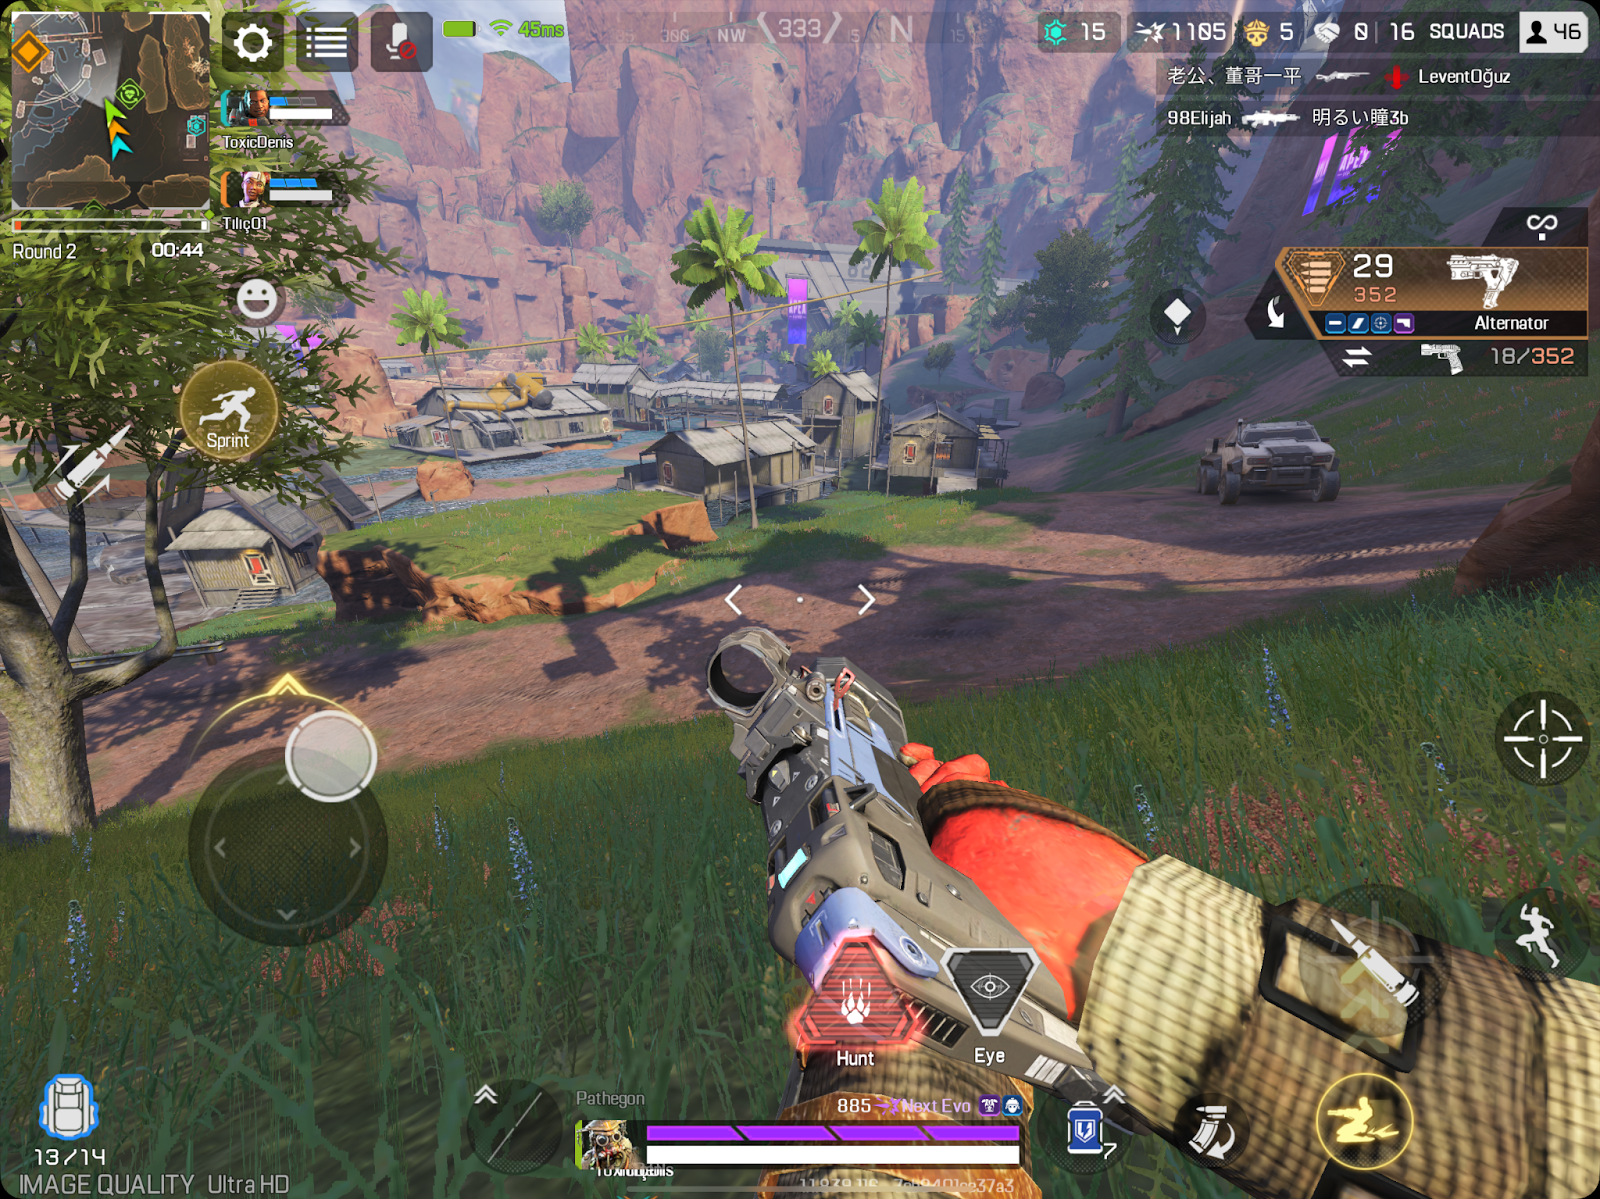 playing apex legends mobile on ipad pro m1 battery life test